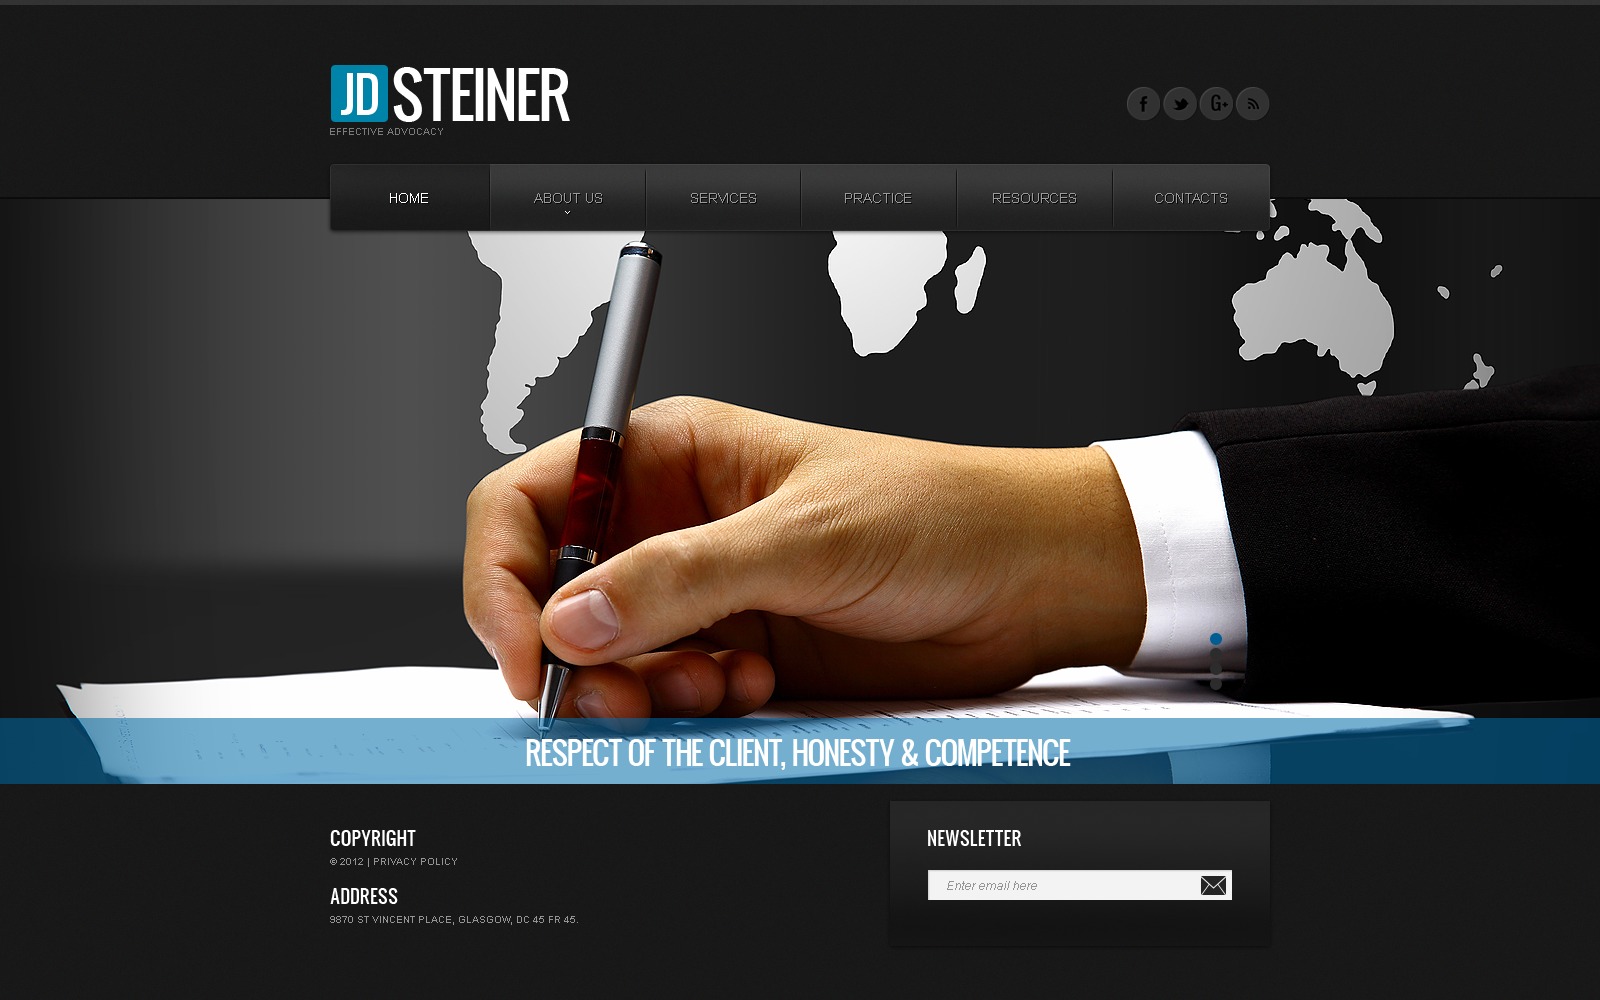 Law Firm Website Template